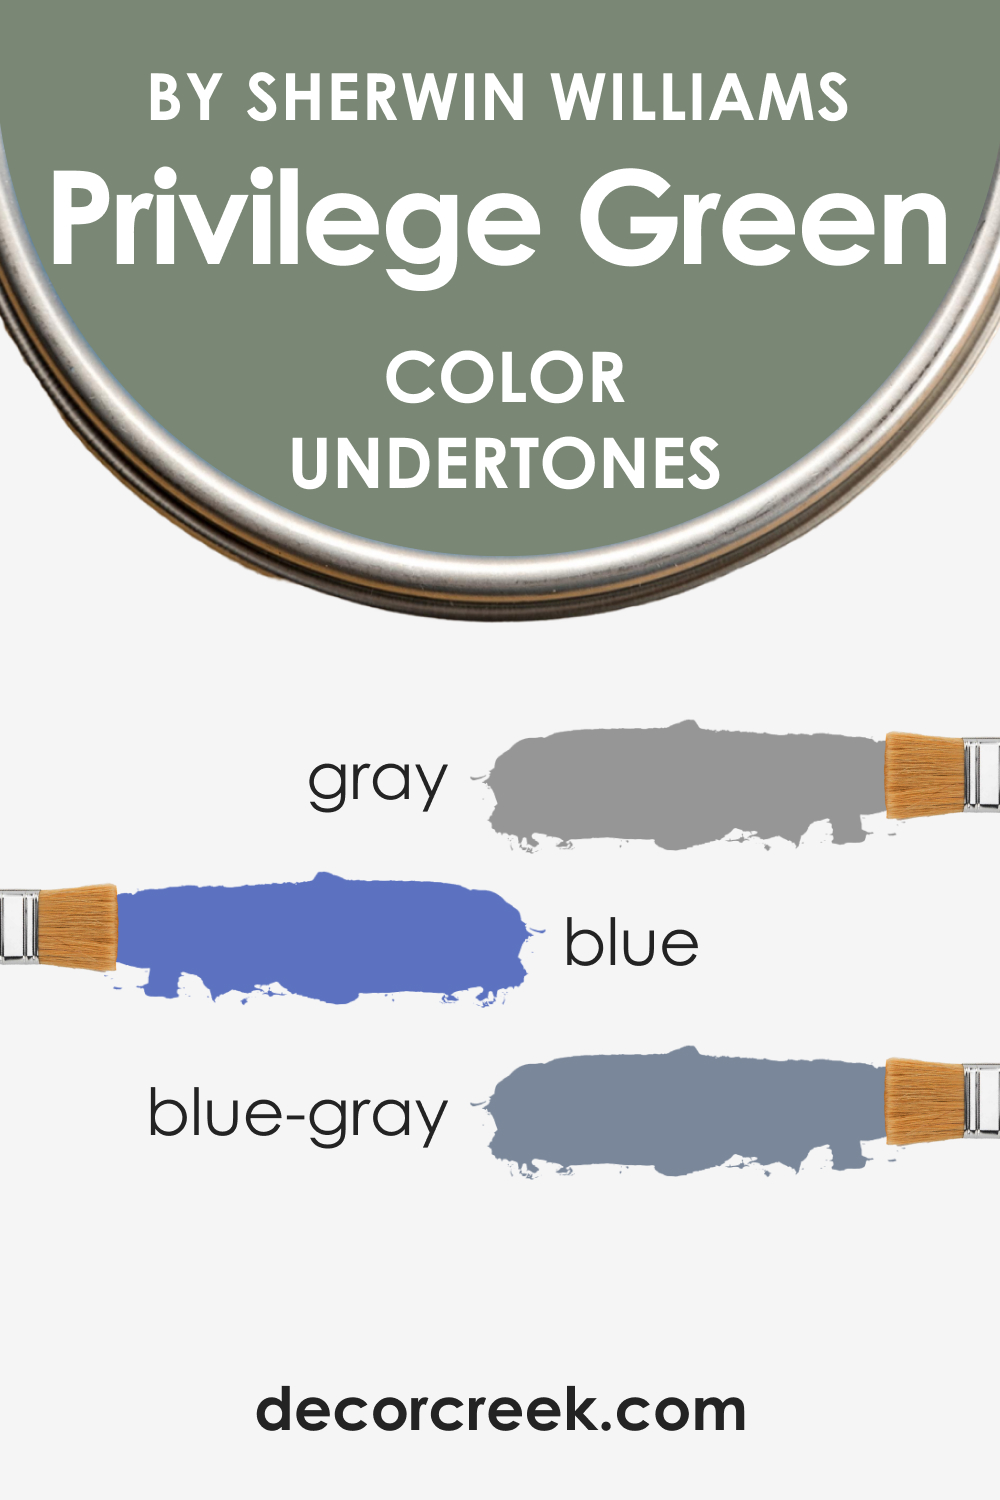 What Undertones Does Privilege Green SW 6193 Have?